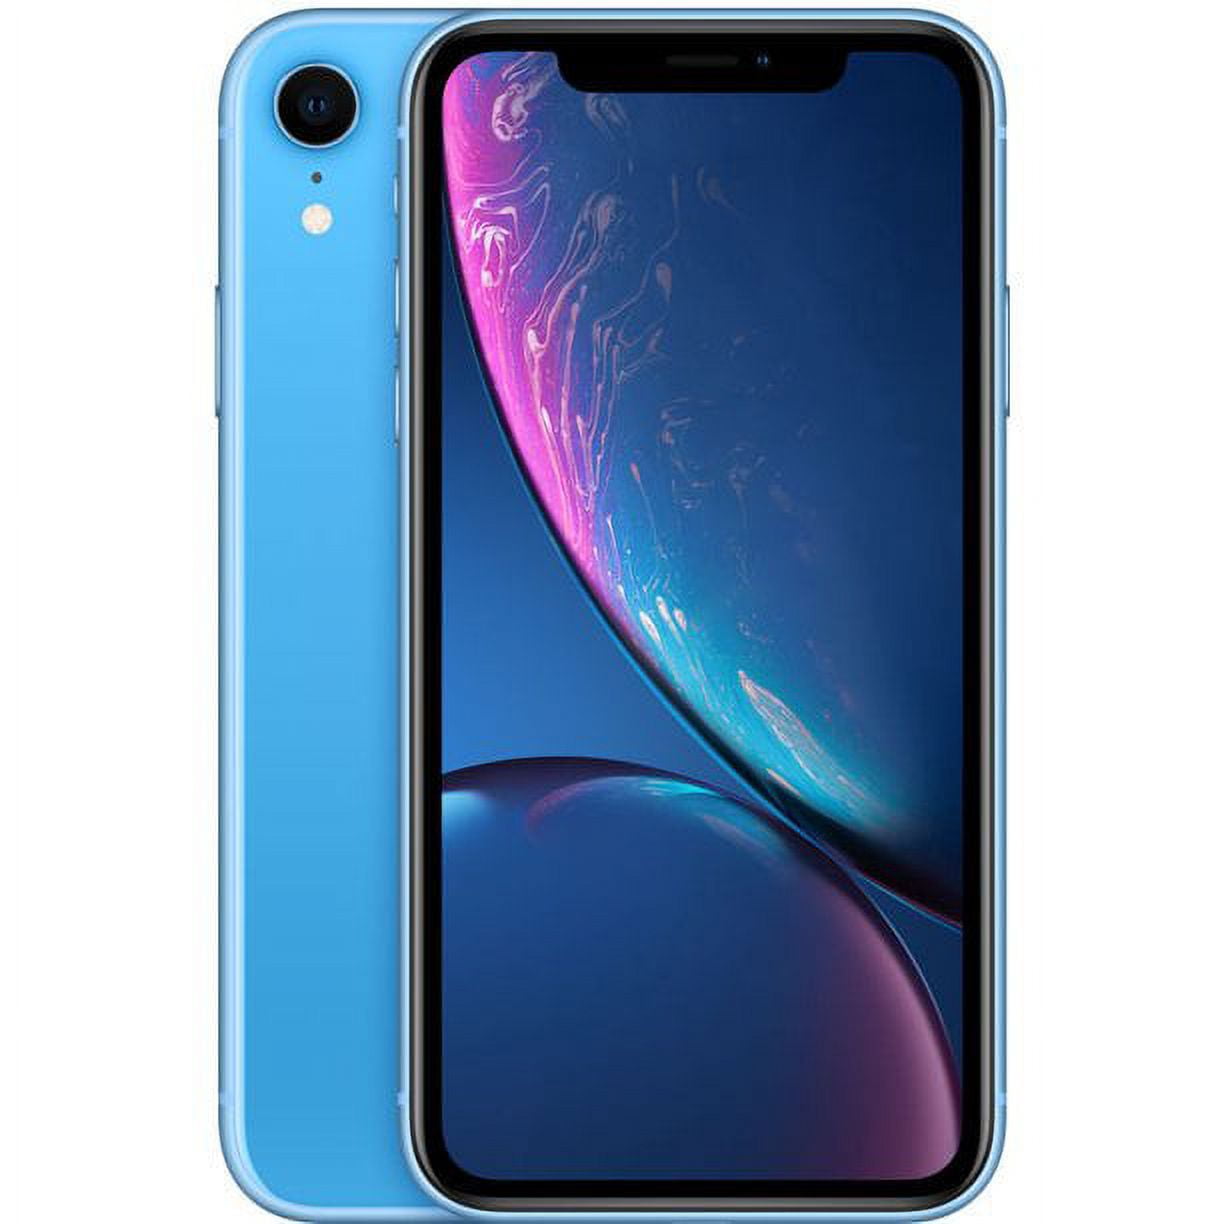 Pre-Owned Apple iPhone XR - Carrier Unlocked - 64GB Blue (Good)